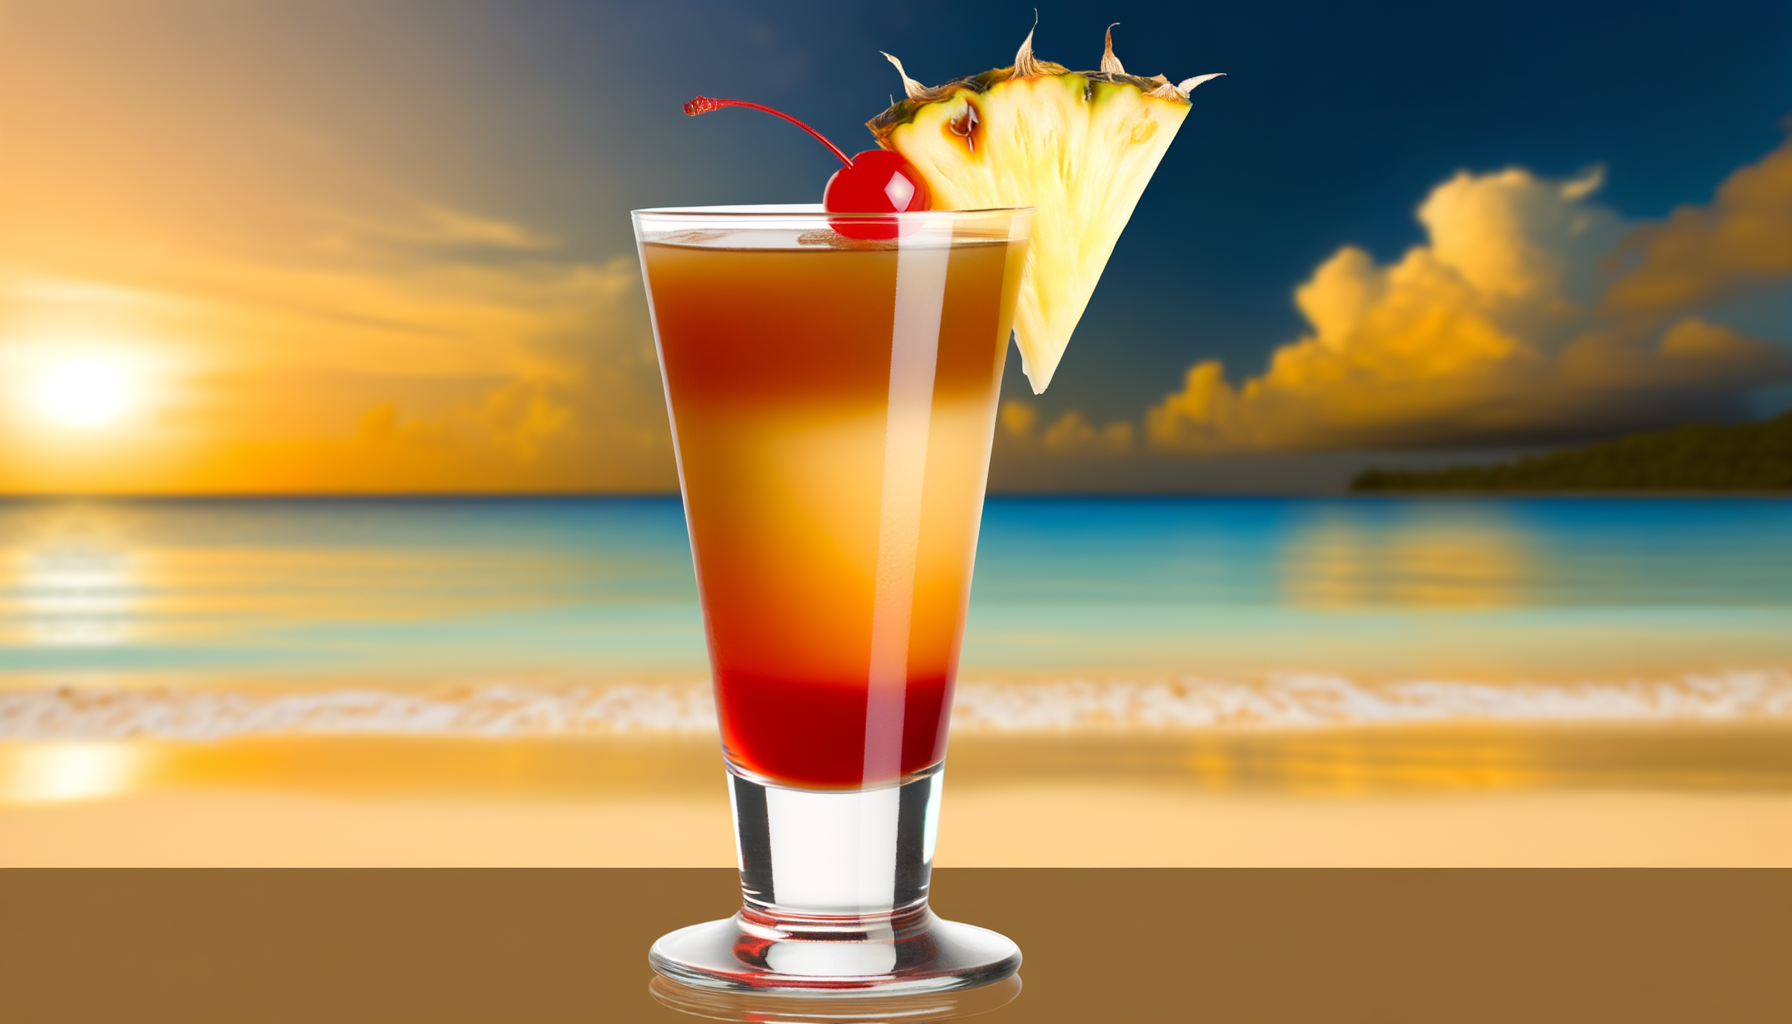 Rich amber, orange, and creamy layers in a Bahama Mama cocktail garnished with pineapple and cherry against a sunset beach backdrop.